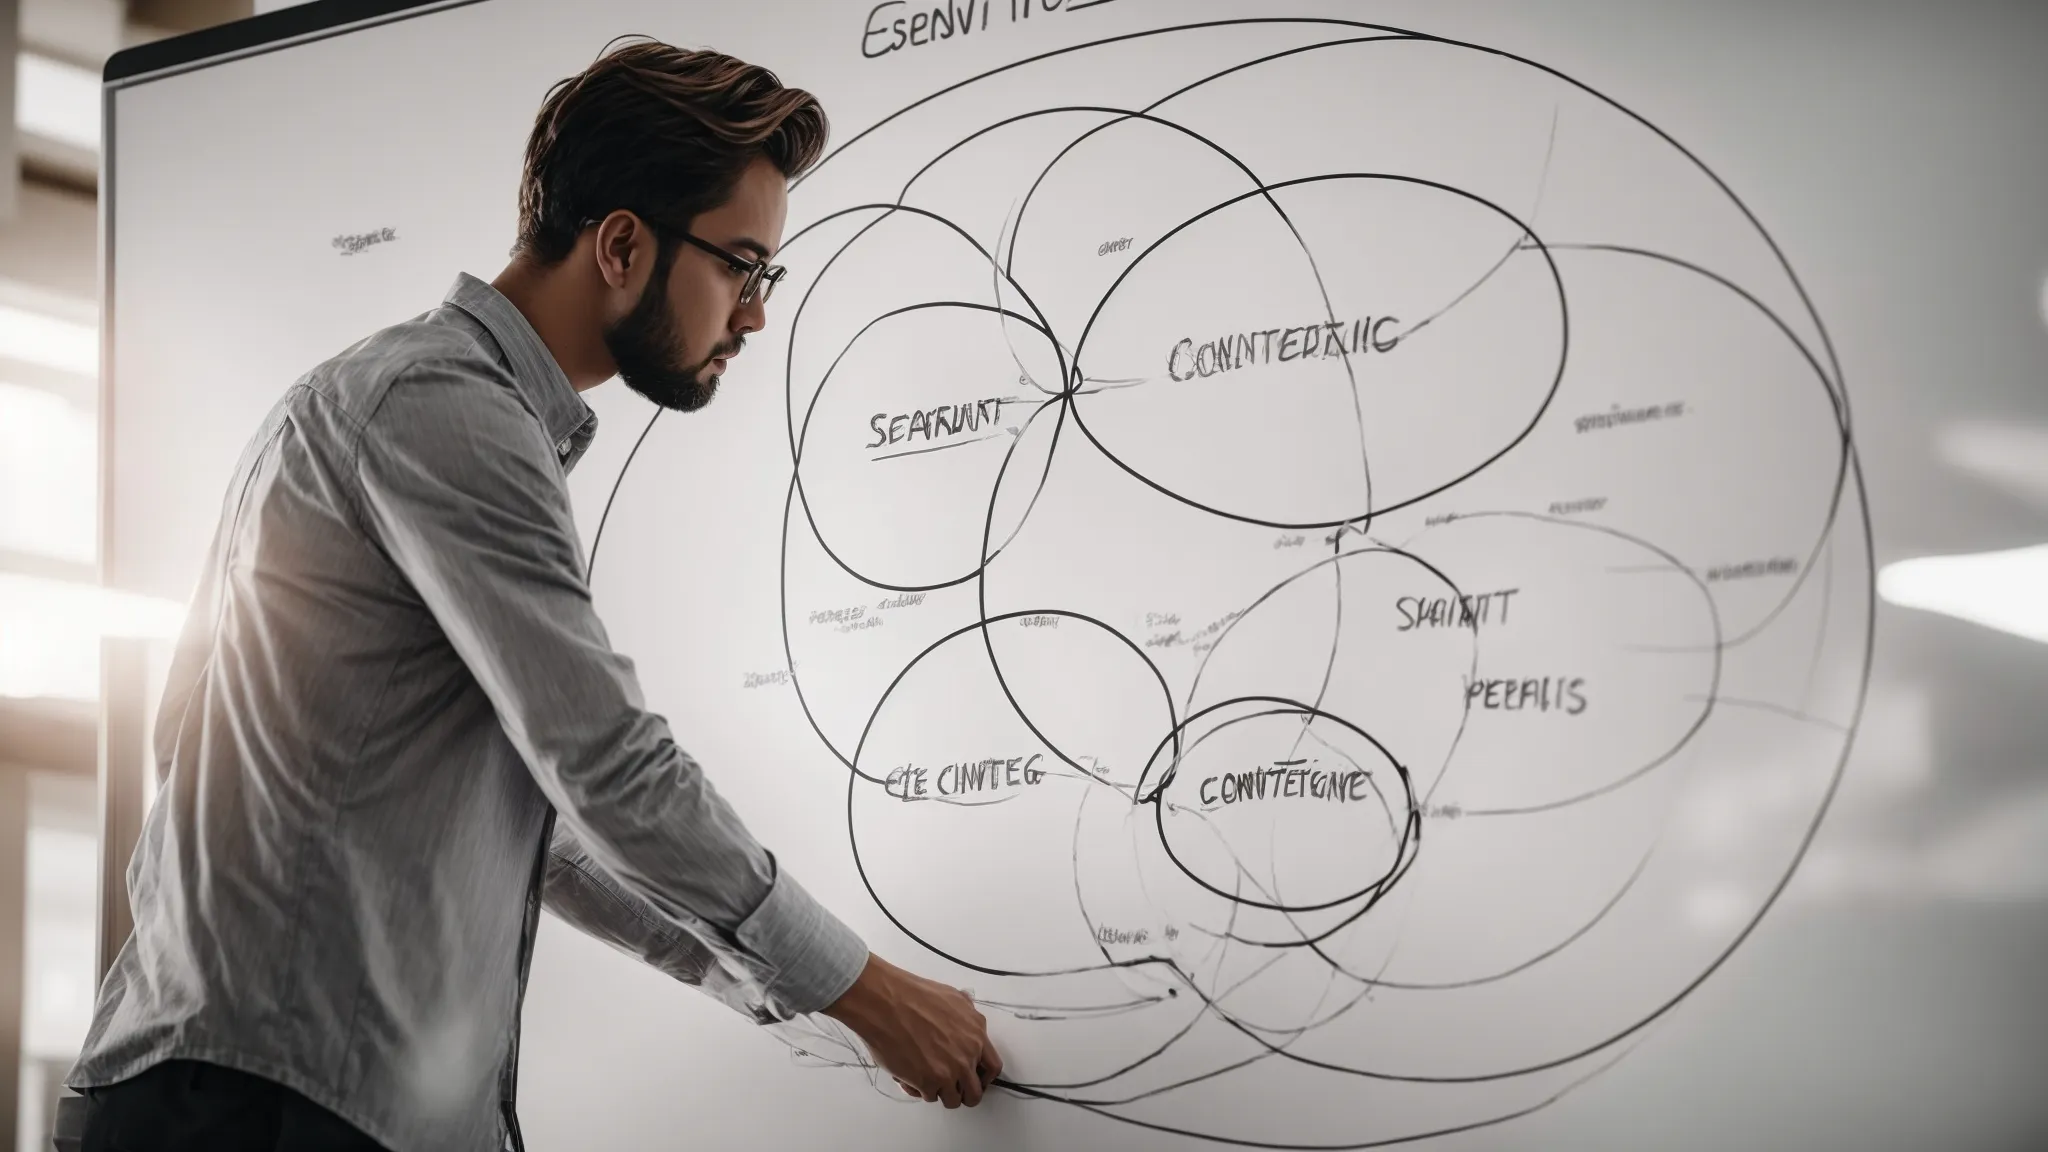 a marketer drawing a large venn diagram on a whiteboard, with "content marketing" and "seo" intersecting in the center.